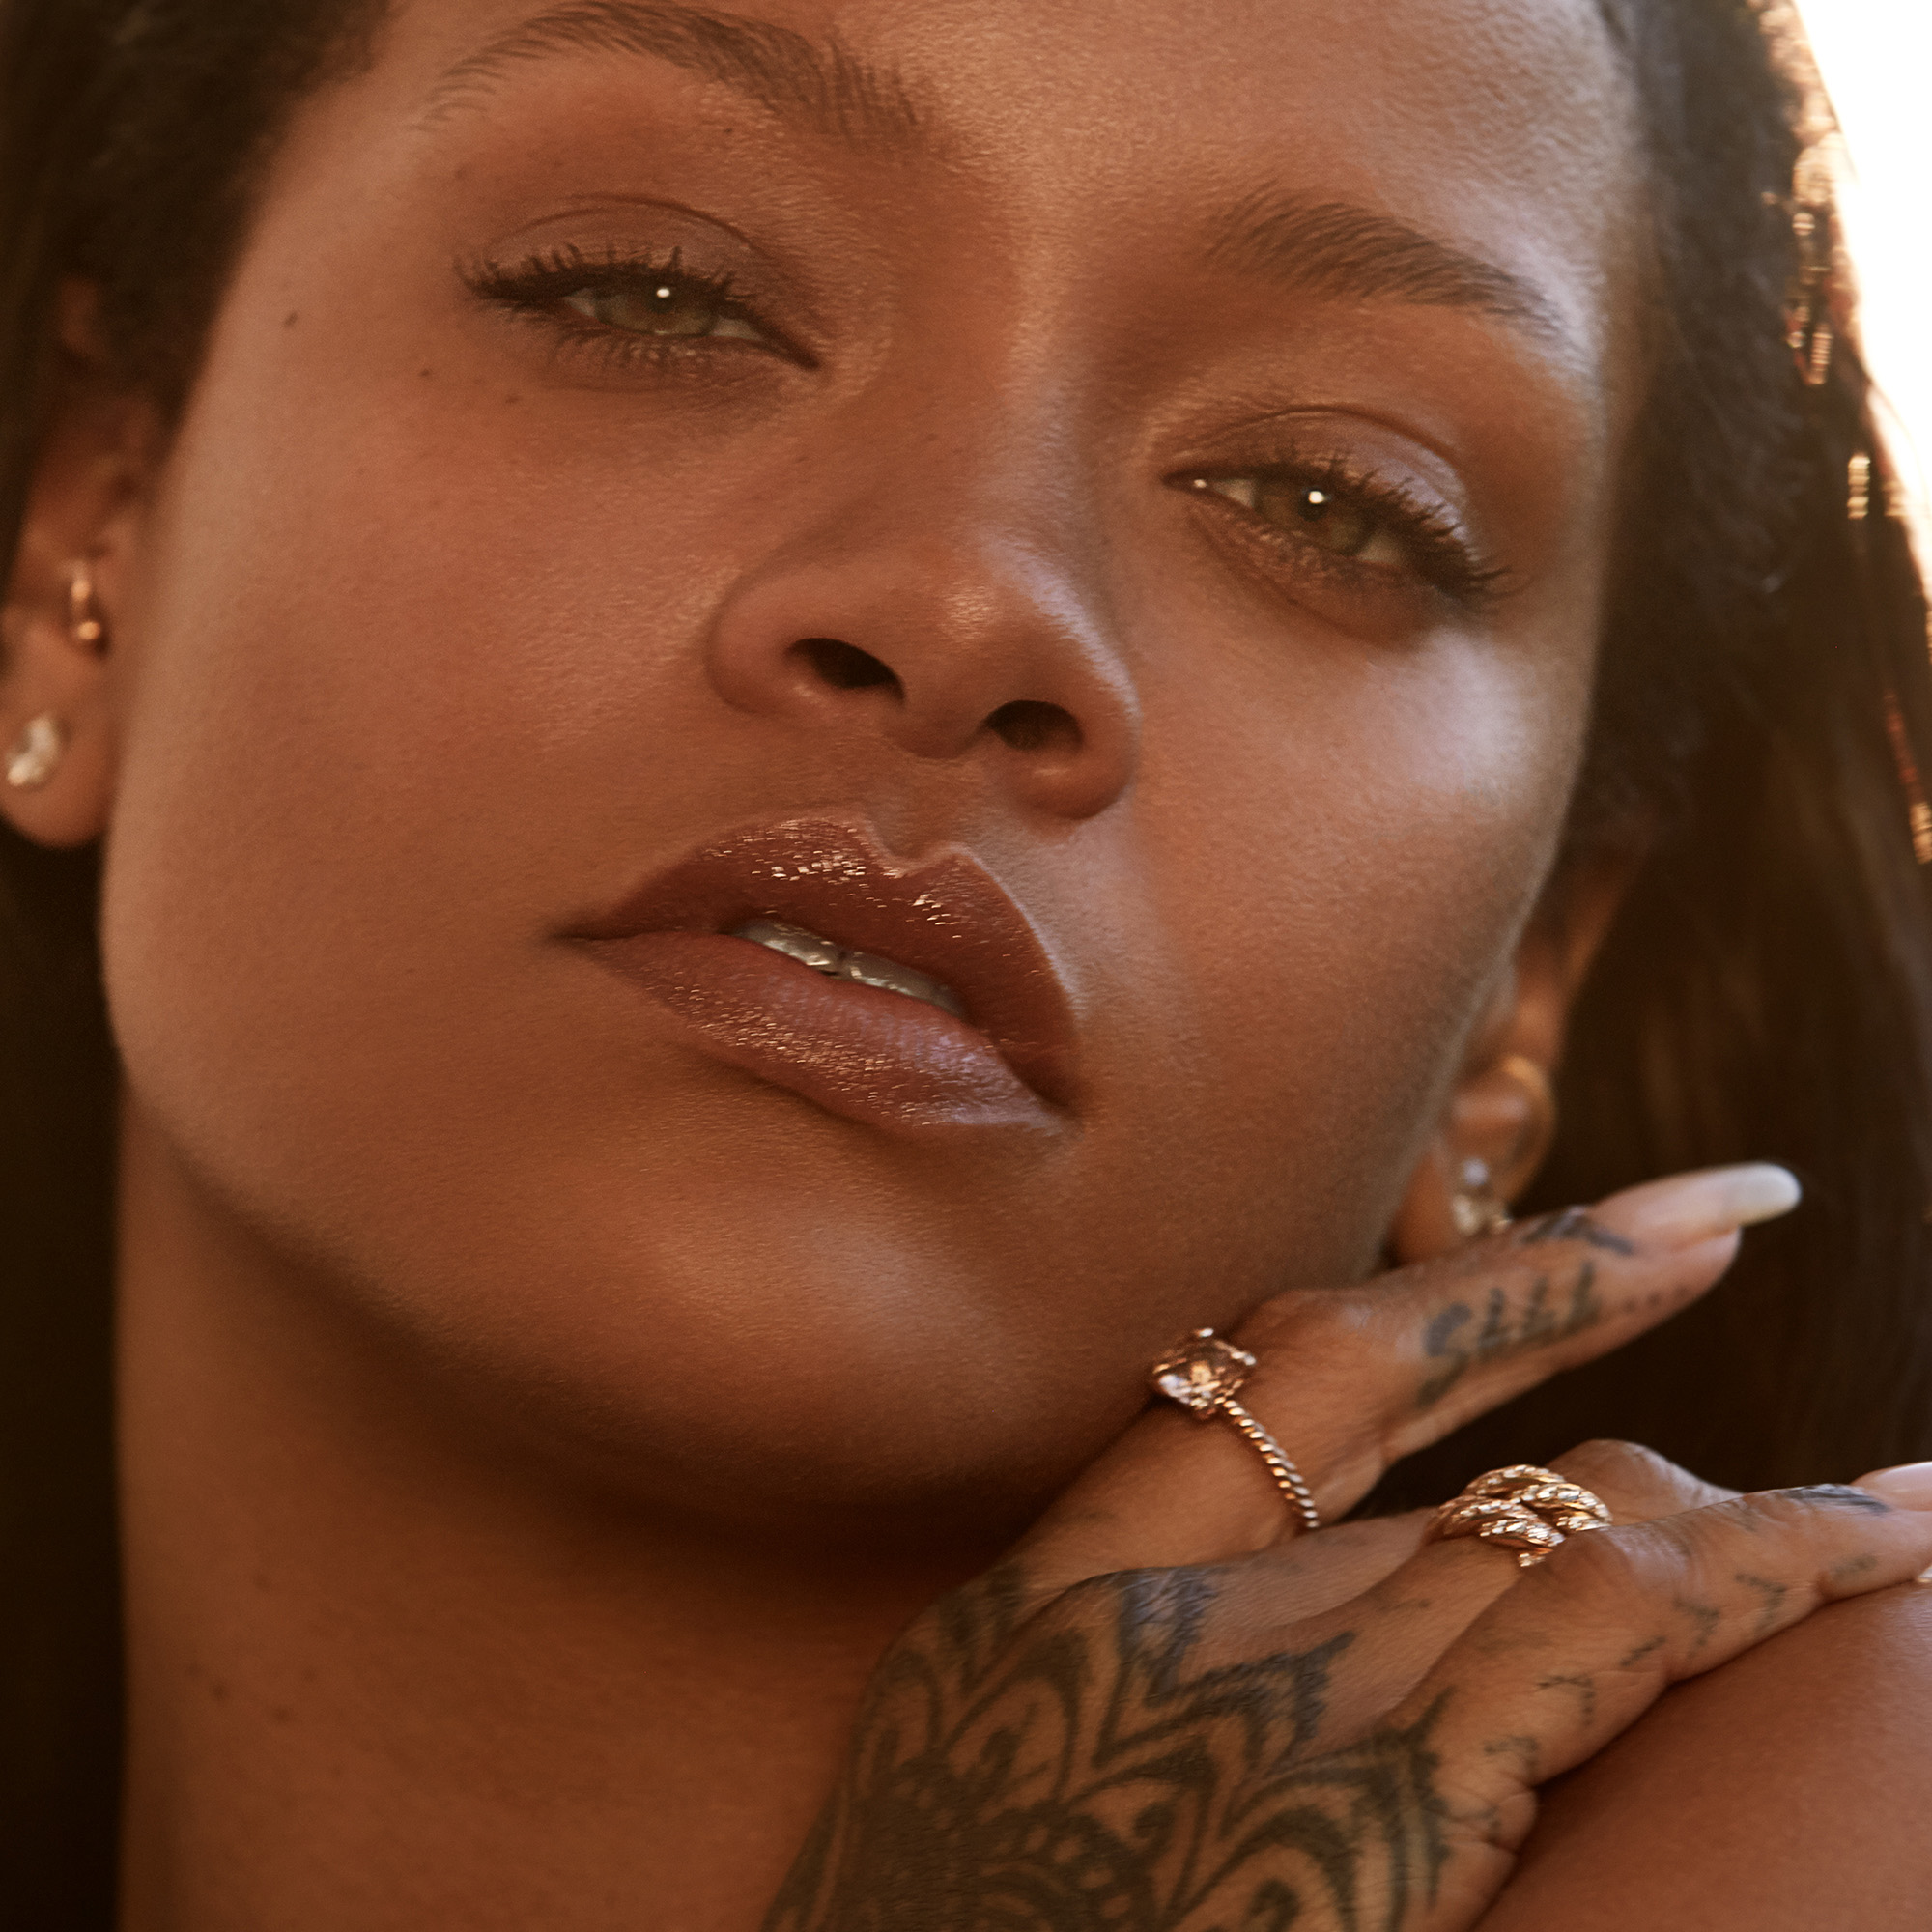 “Fenty Skin is my vision of the new culture of skincare - I wanted to create amazing products that really work, that are easy to use, and everyone can apply it.” - Rihanna